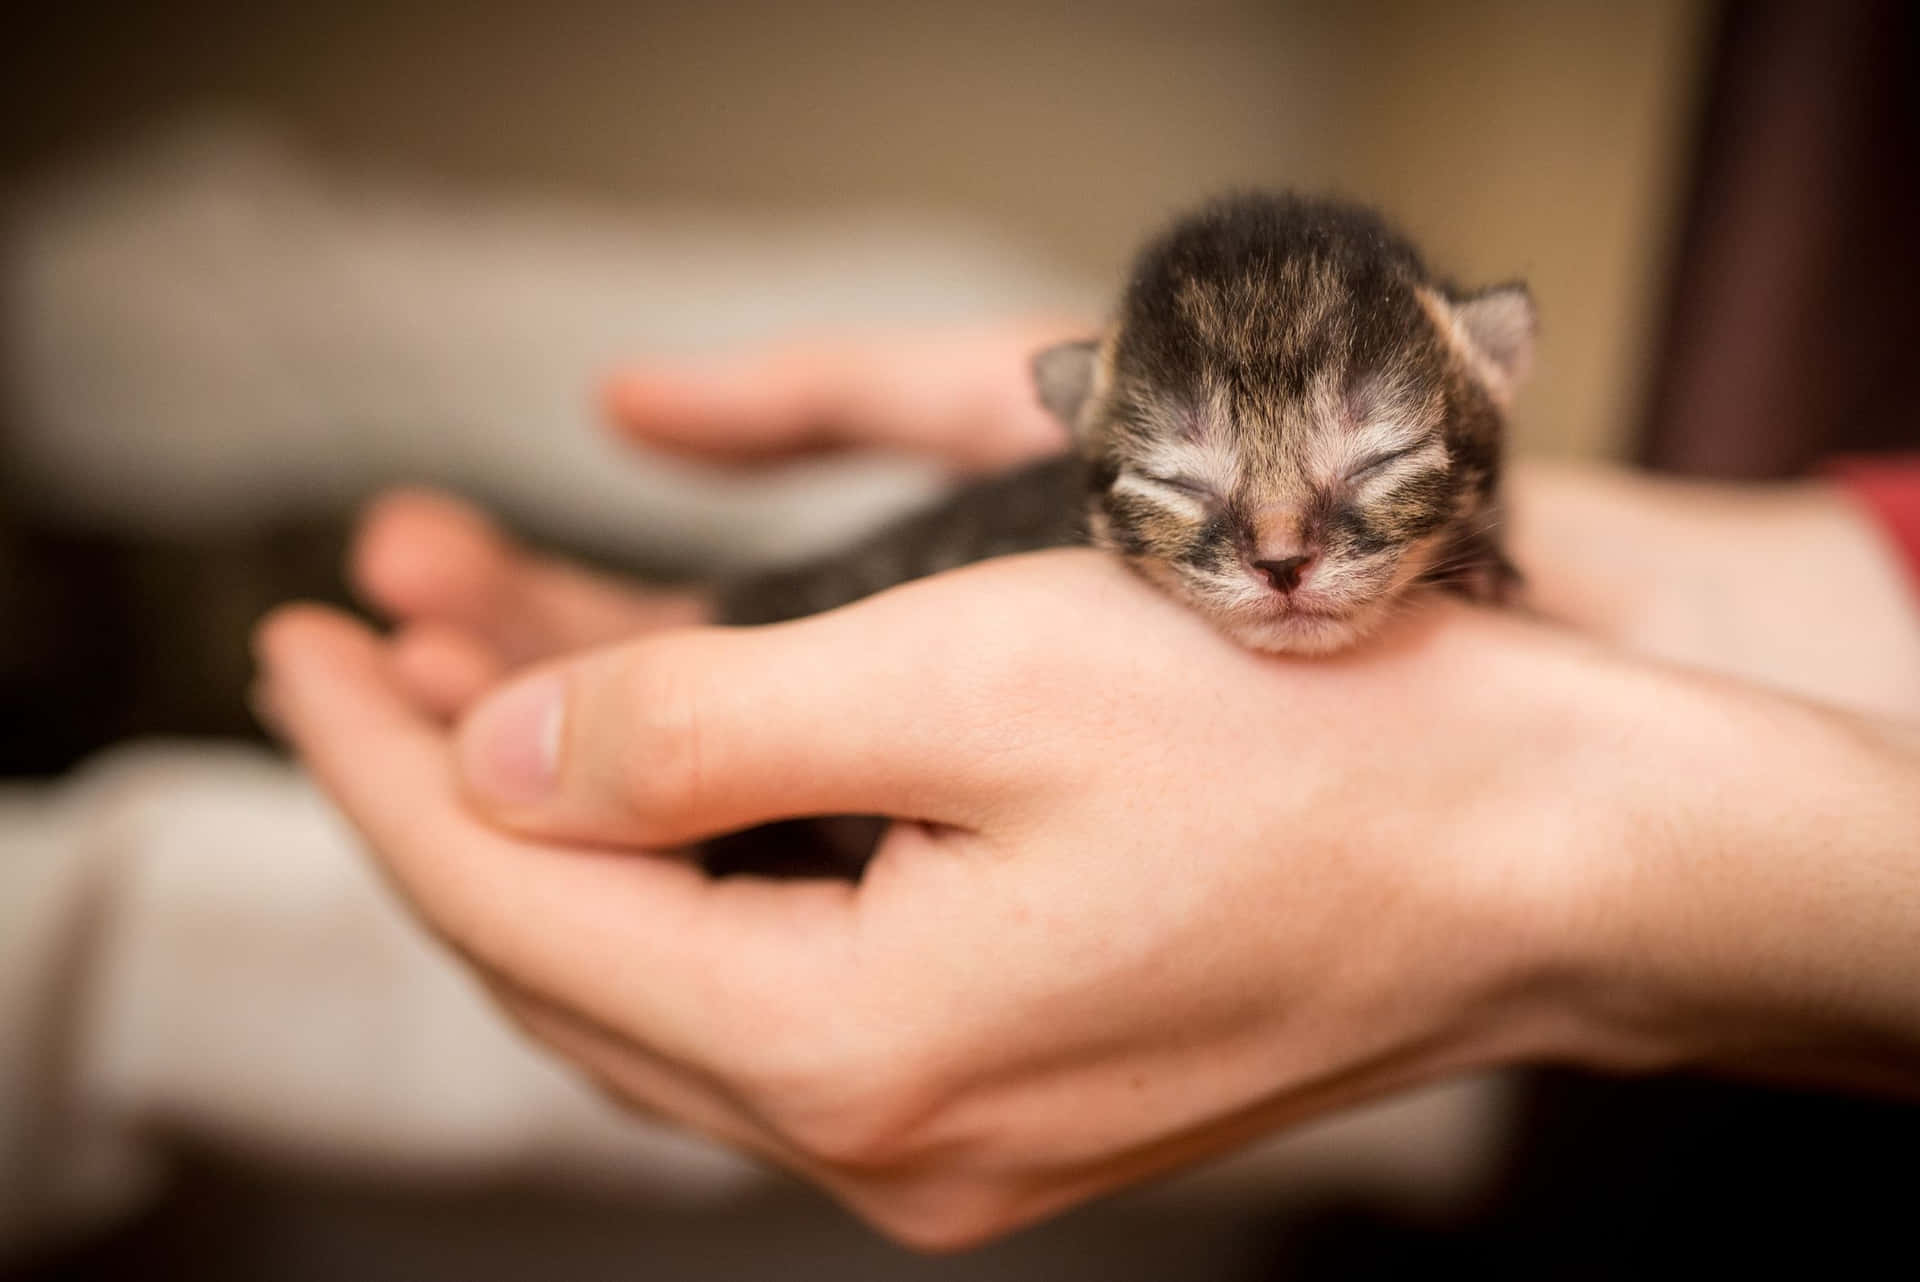 Aww, How Cute! This Adorable Baby Cat is Ready to Brighten Your Day!